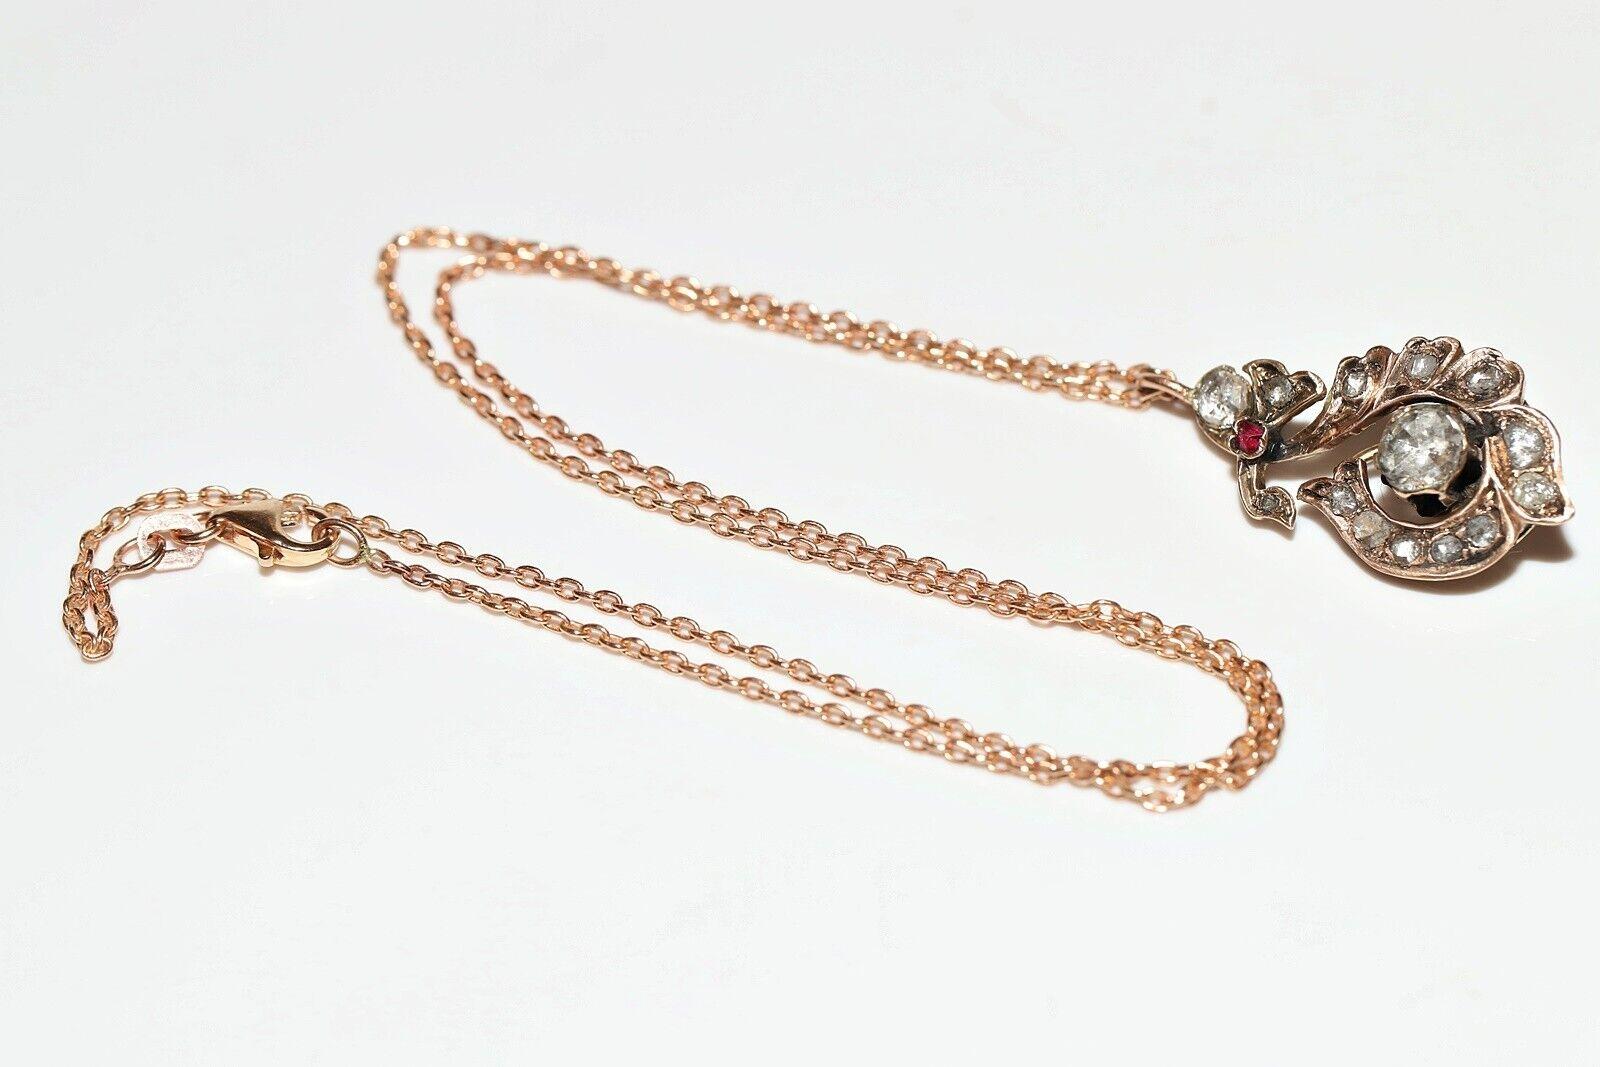 Antique Circa 1900s 8k Gold Natural Rose Cut Diamond And Ruby Decorated Necklace For Sale 4